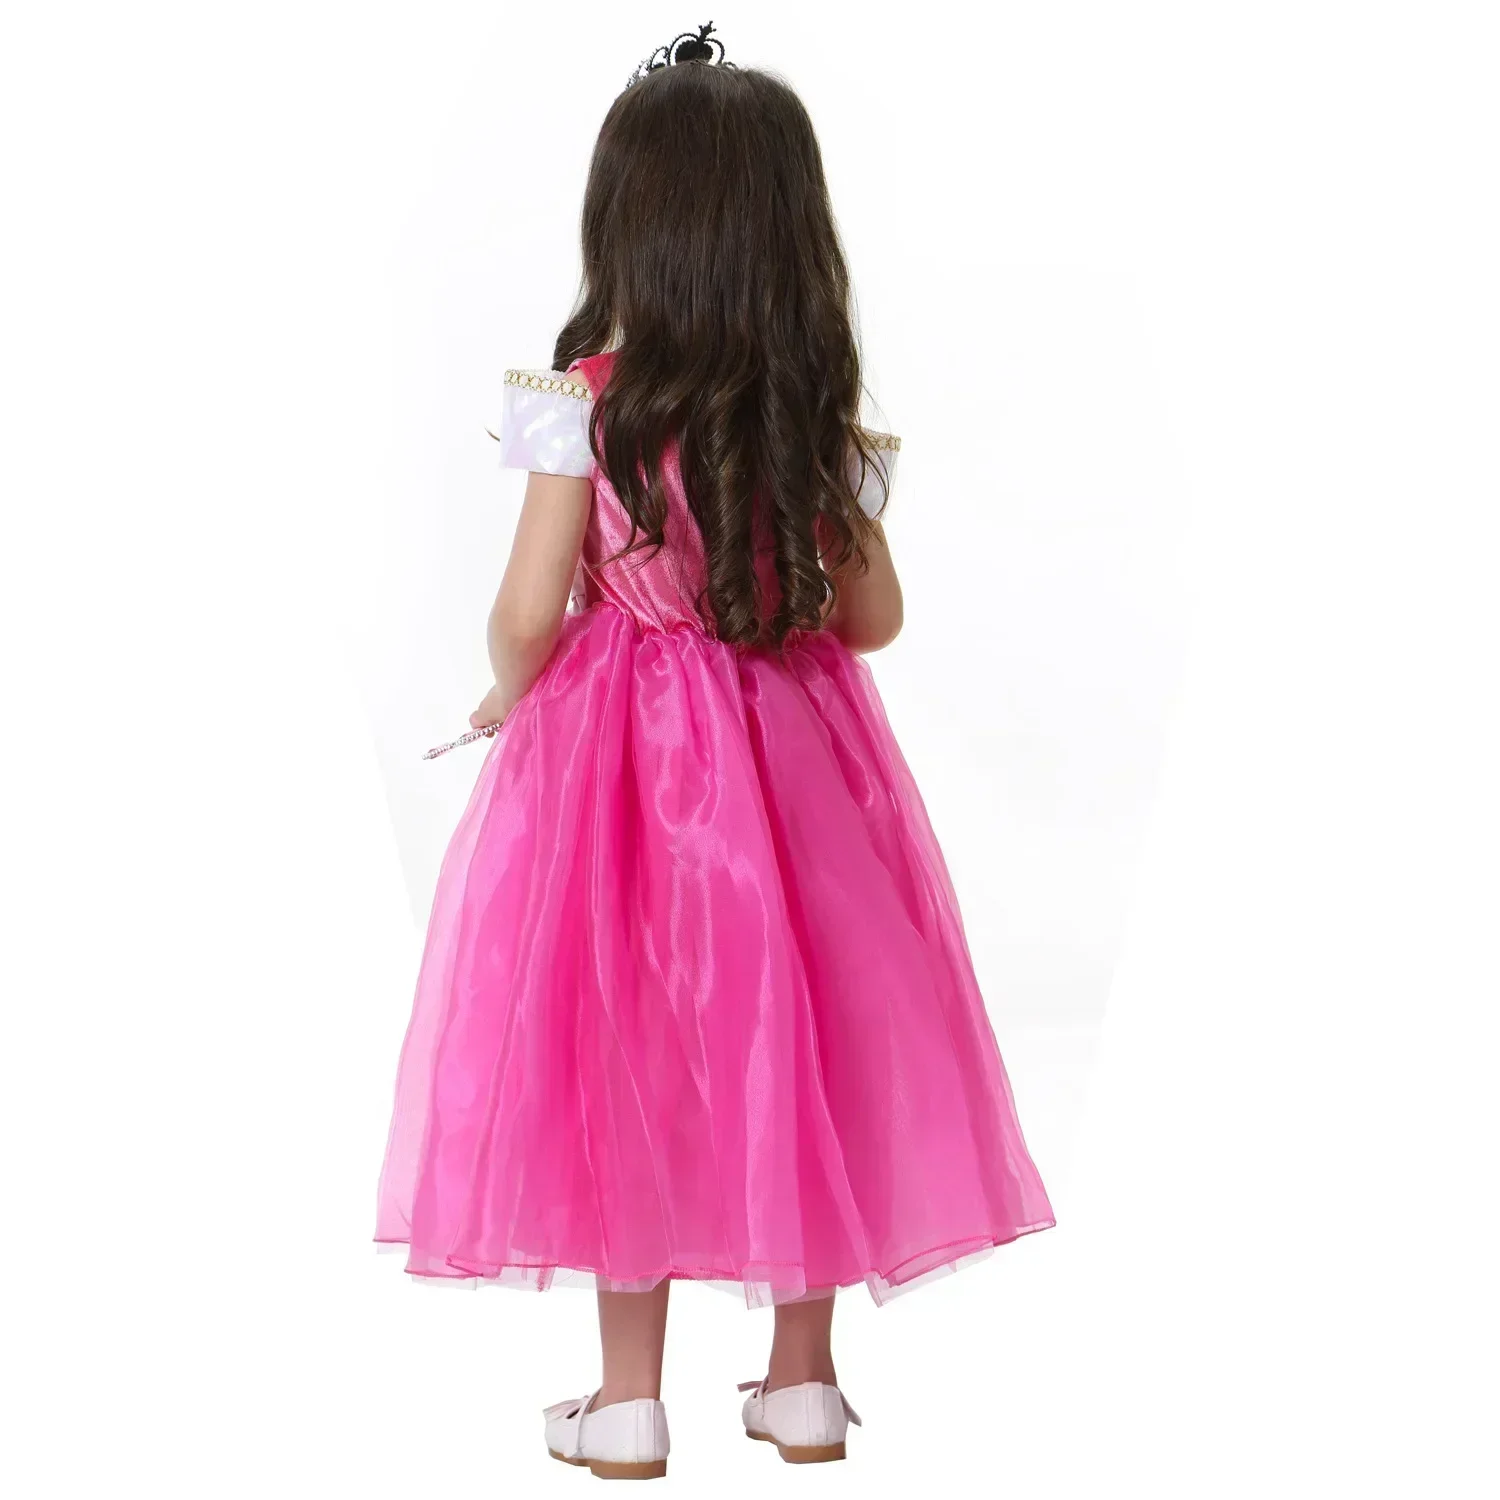 Girls Aurora Dress Princess Halloween Cosplay Costume Princess Rosy Pink Deluxe Outfit Kids Birthday Party Gown Fairy Disguise